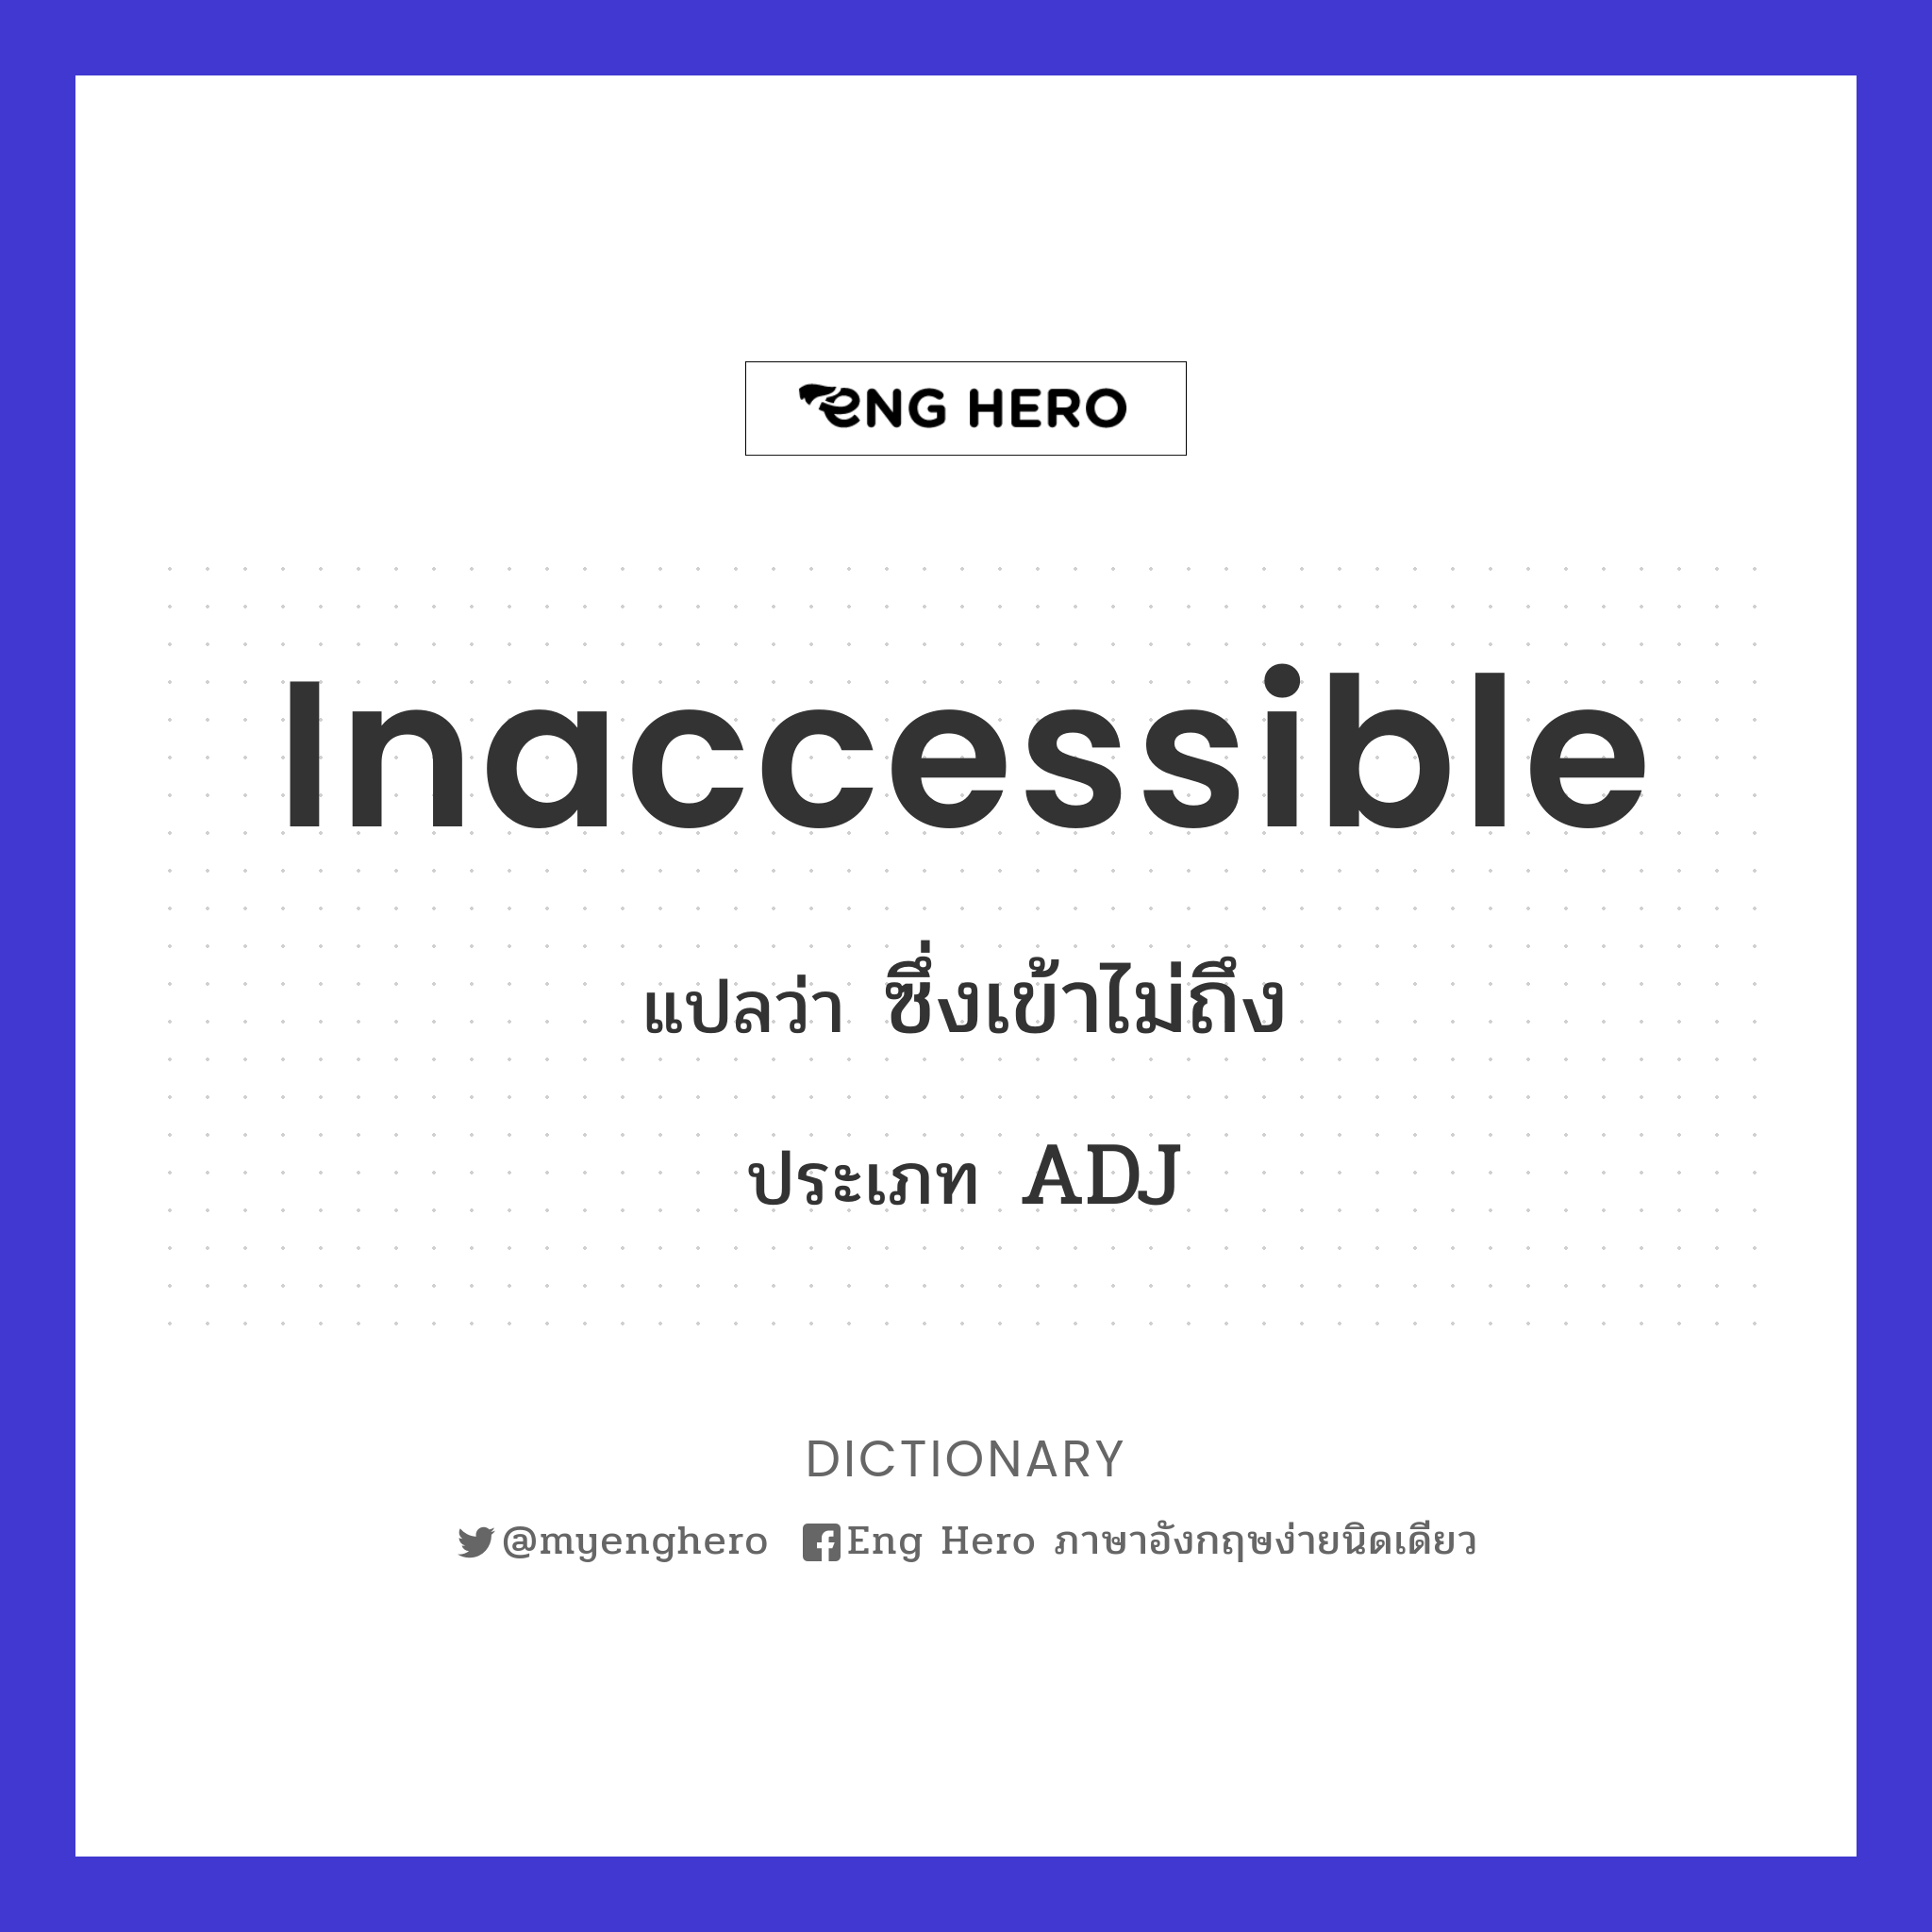 inaccessible